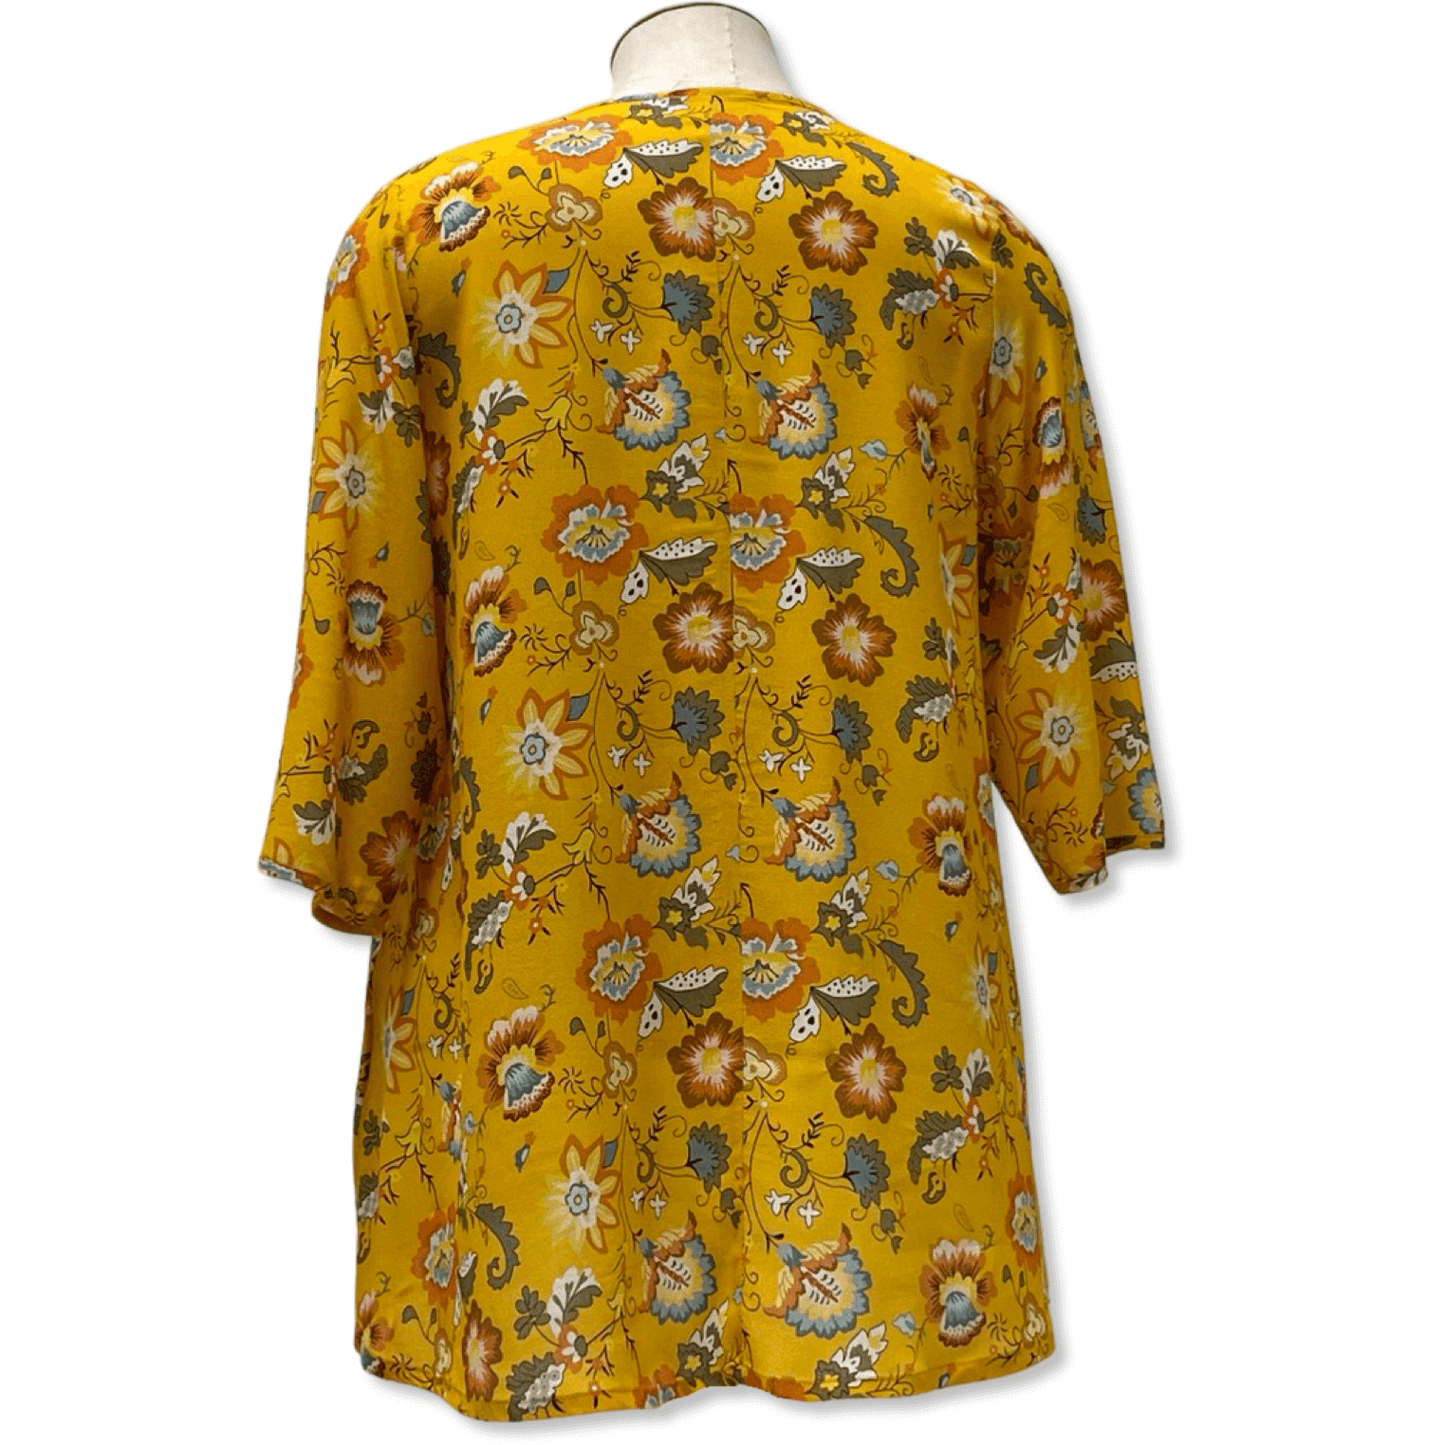 Bloom Clothing NZ,SUNSHINE ON A CLOUDY DAY TOP - Tuscany Multi Floral,$70.00,